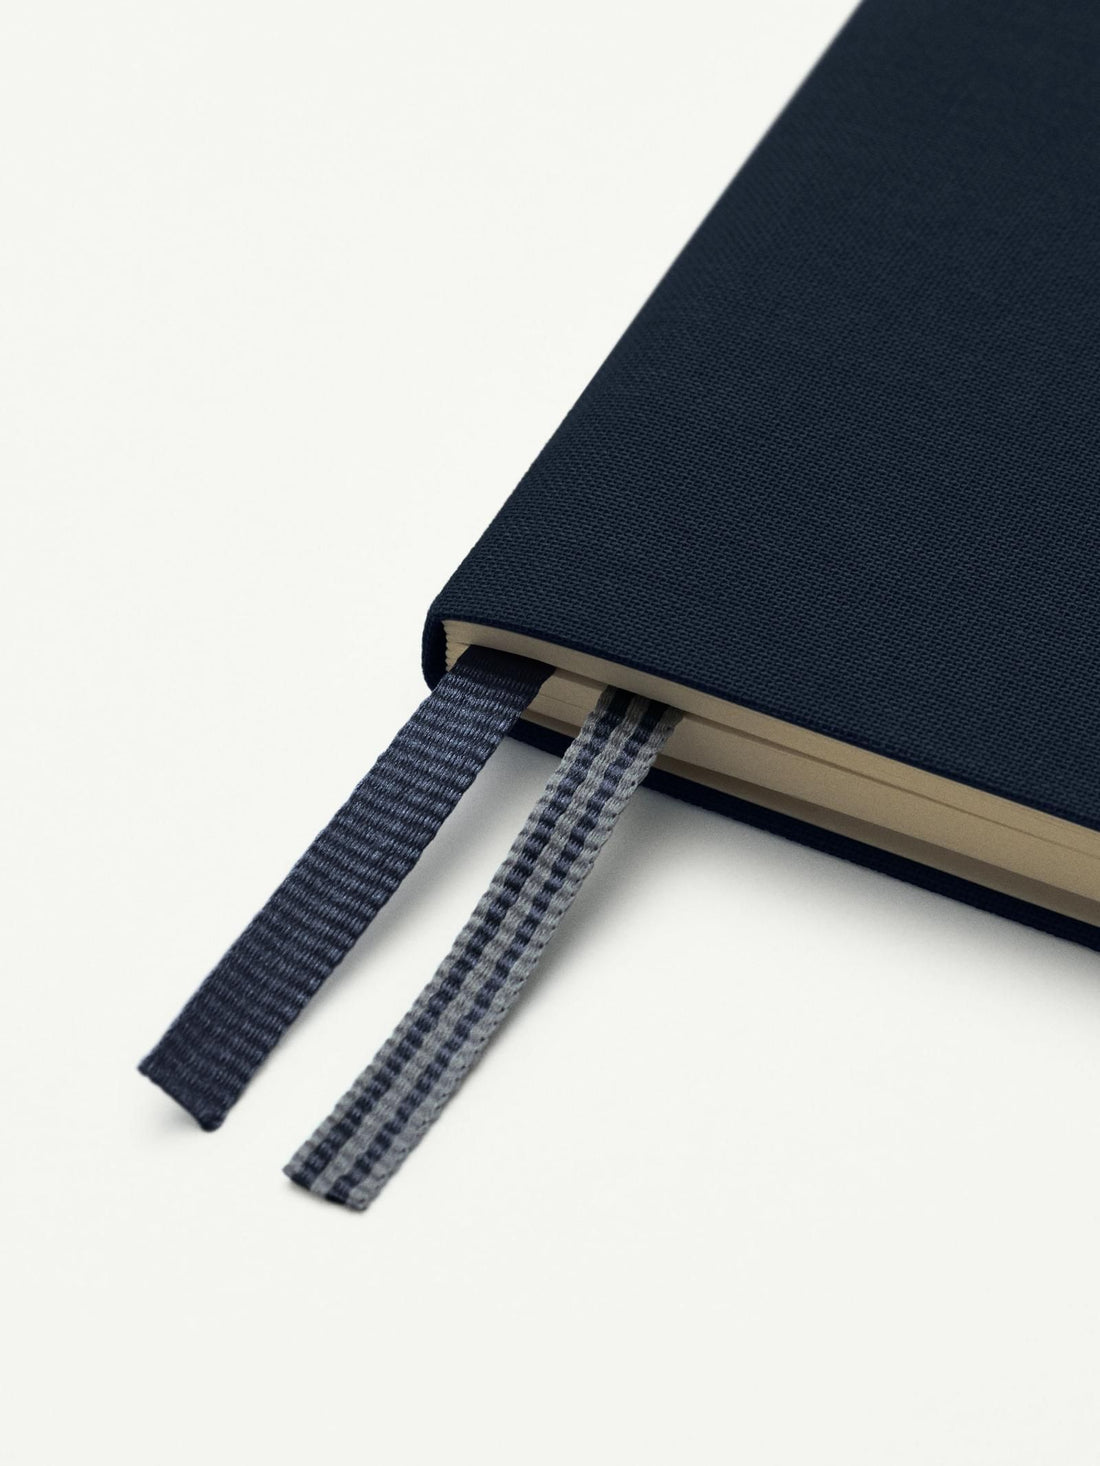 Monocle Hardcover Notebook B5 - Navy